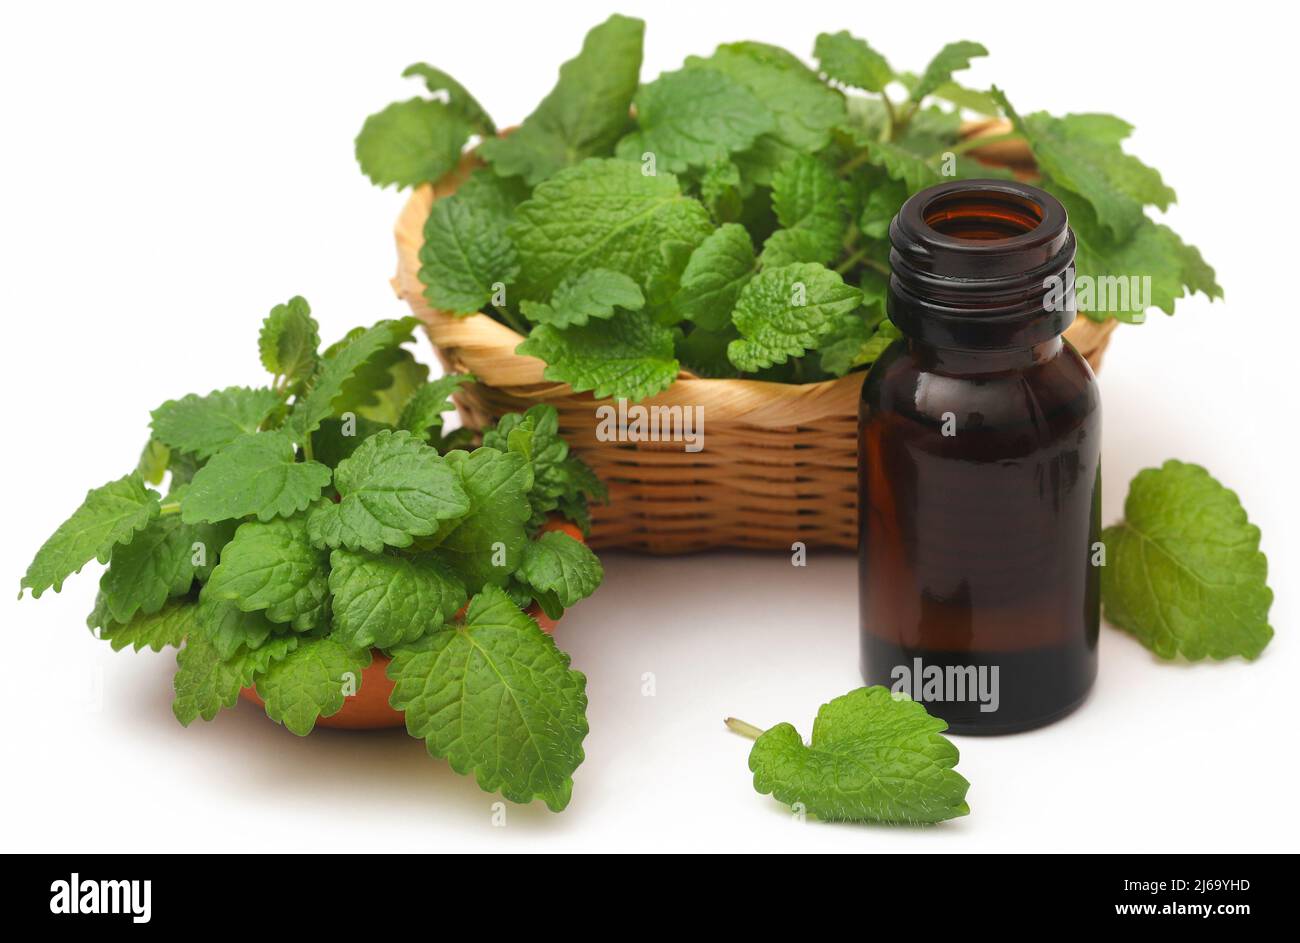 Lemon balm leaves with extracted essential oil in bottle over white background Stock Photo